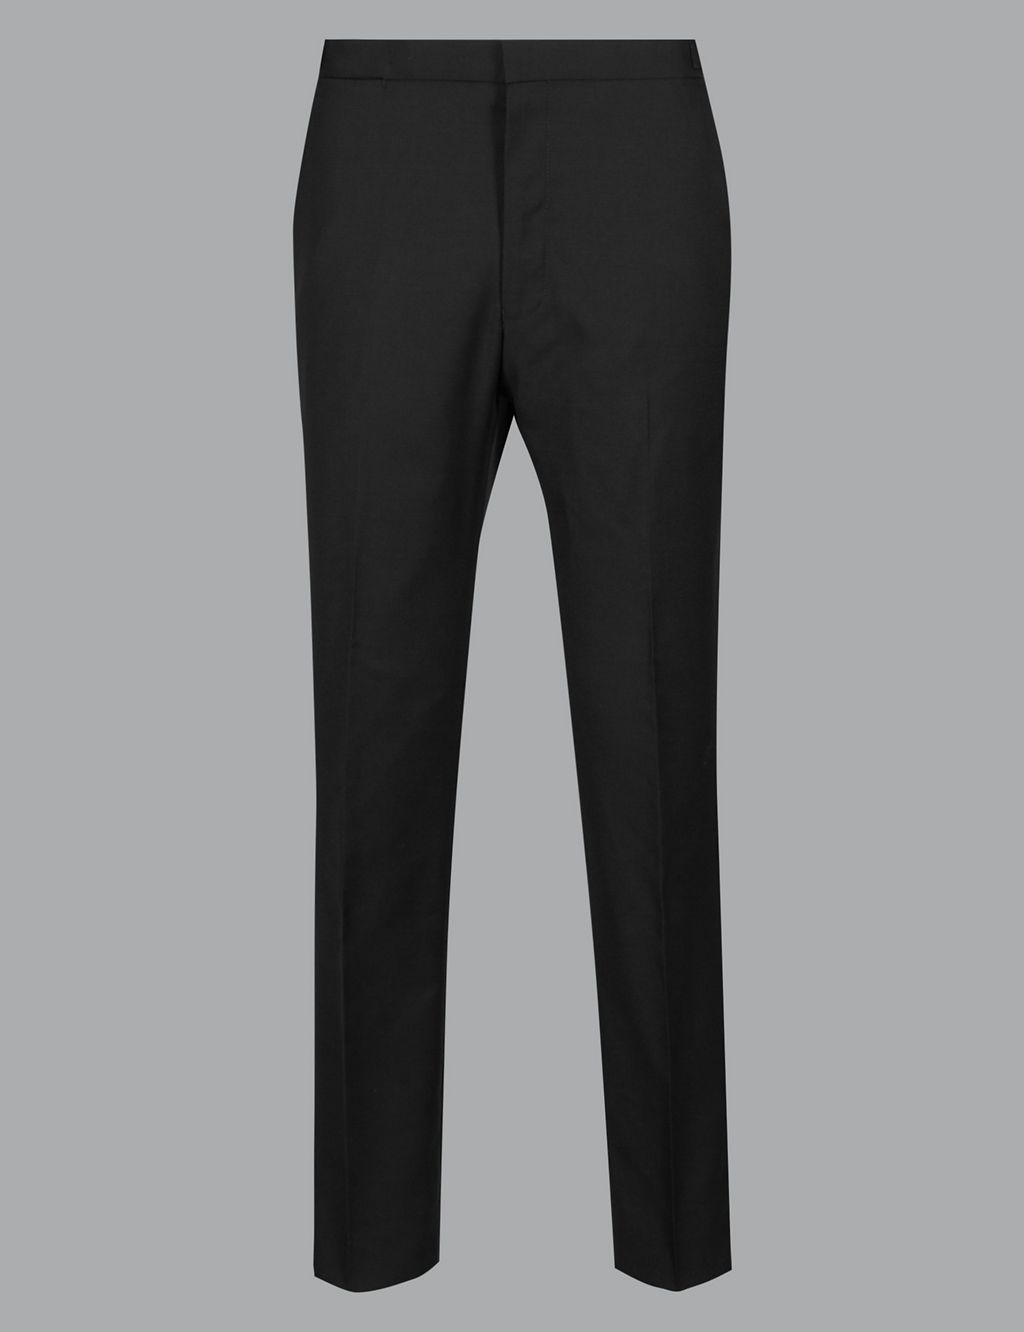 Big & Tall Black Tailored Fit Wool Trousers | Autograph | M&S